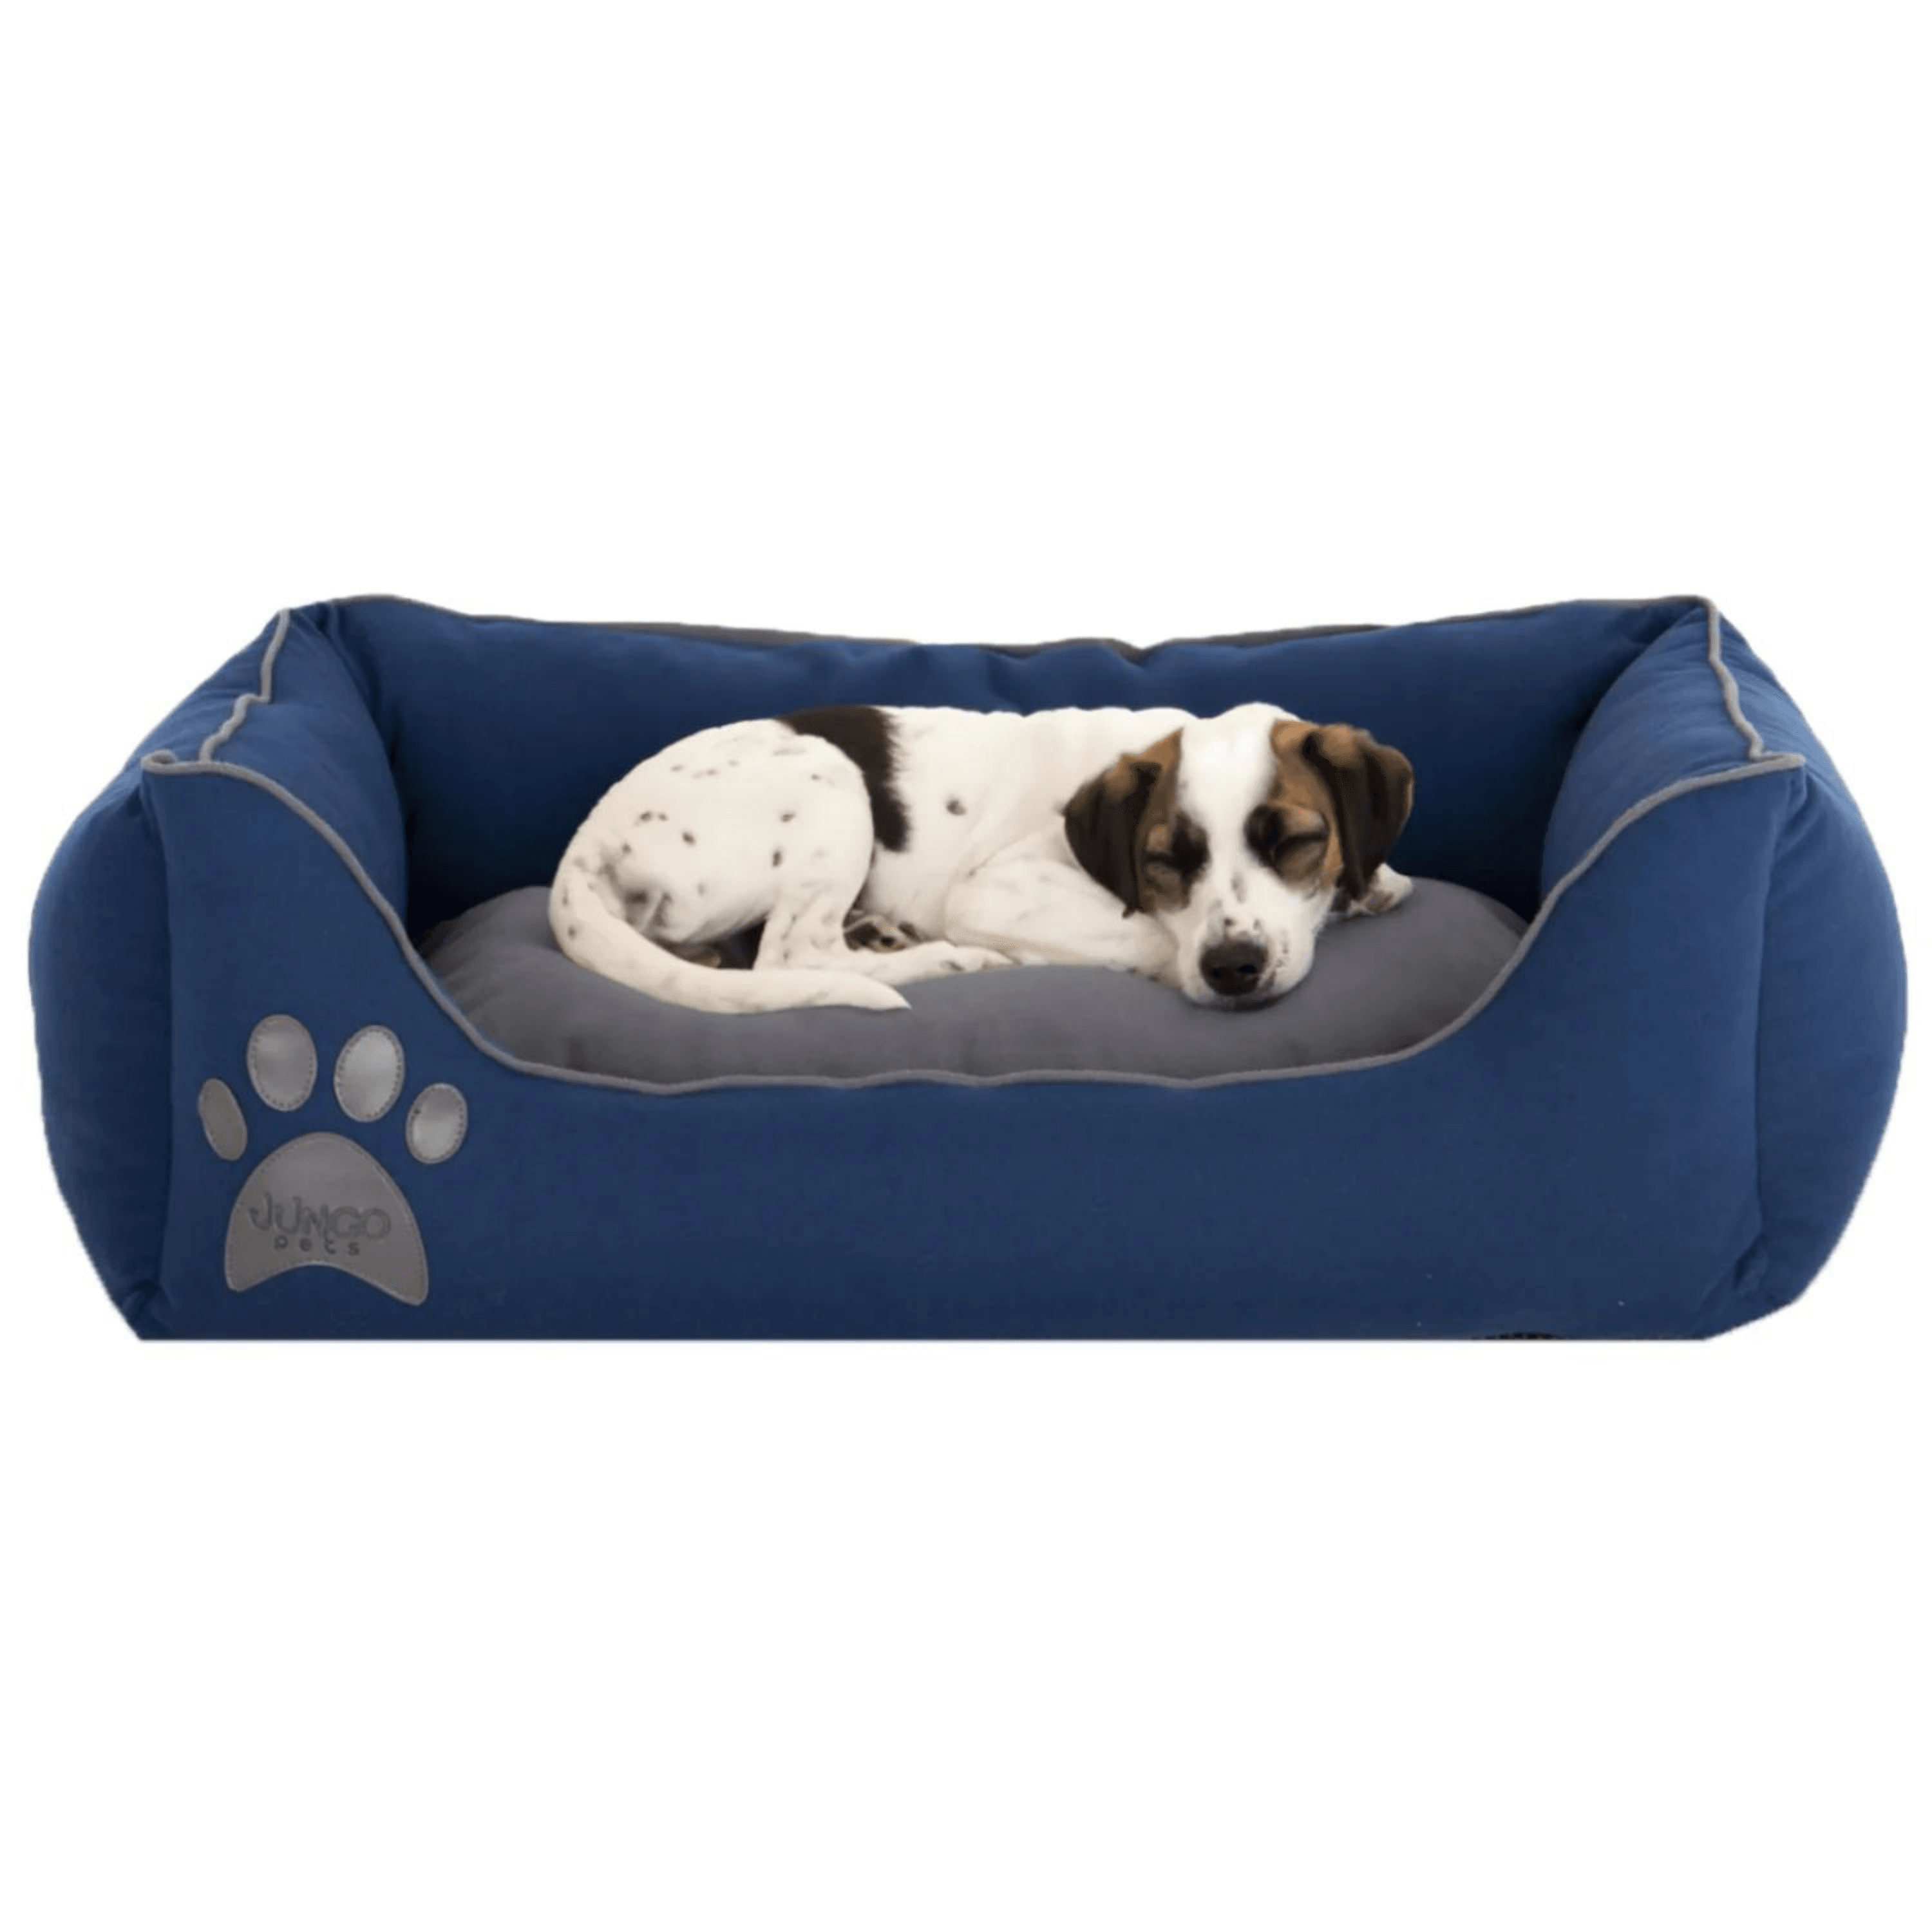 LUCY Navy Blue & Gray High Quality Dog Bed